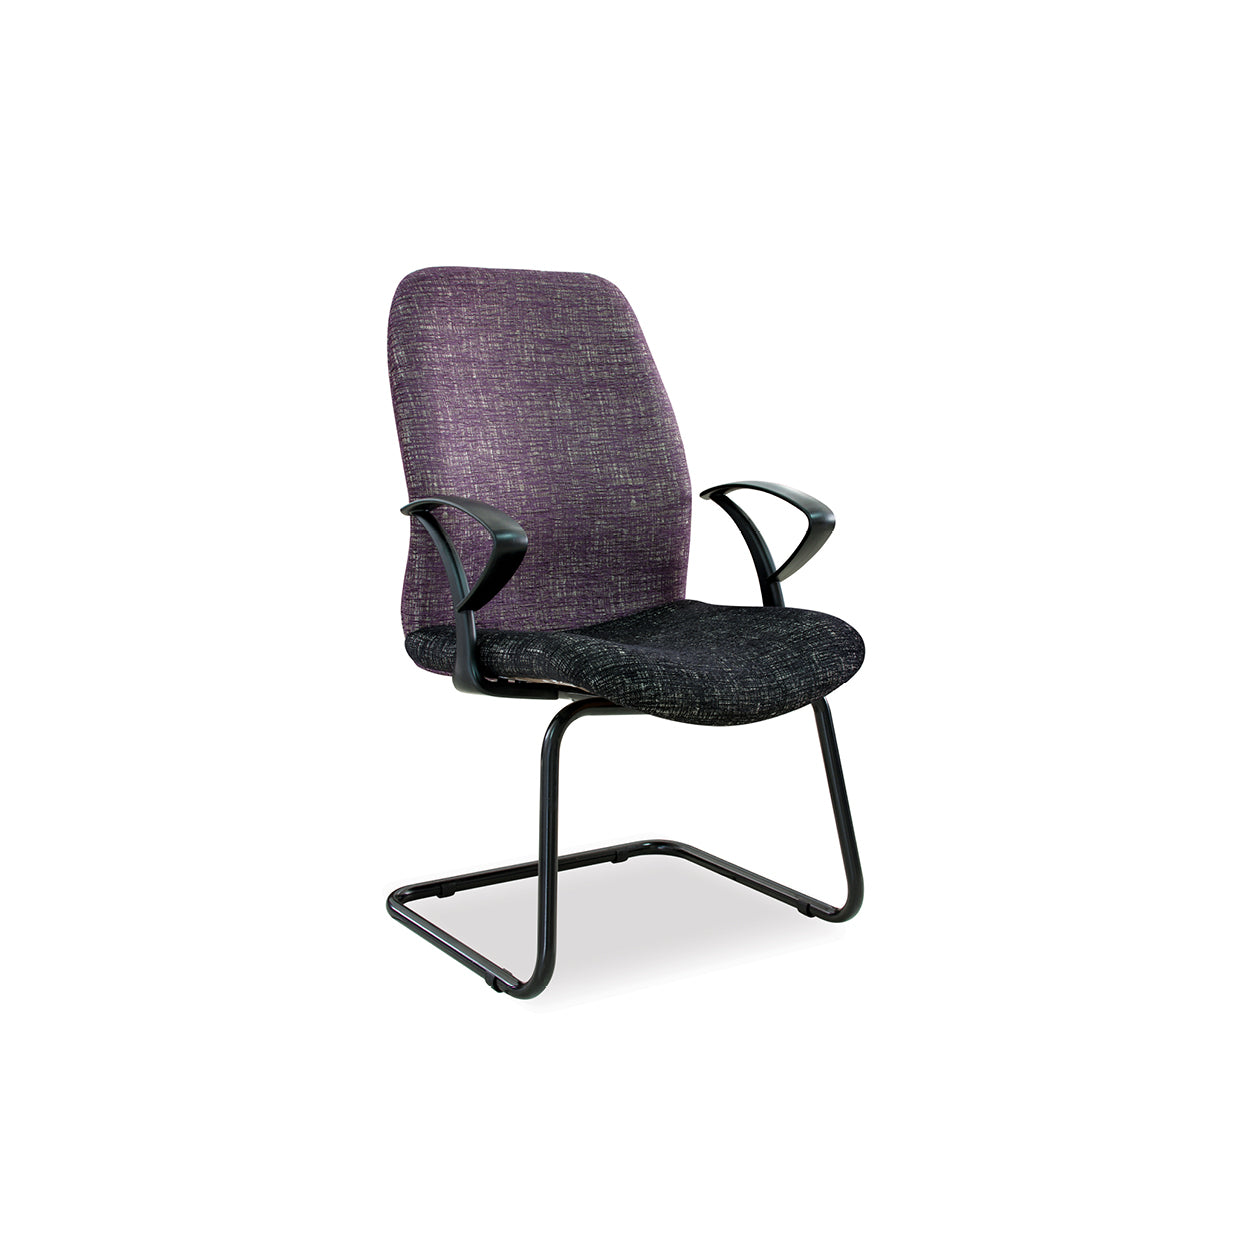 Hedcor visitors chair